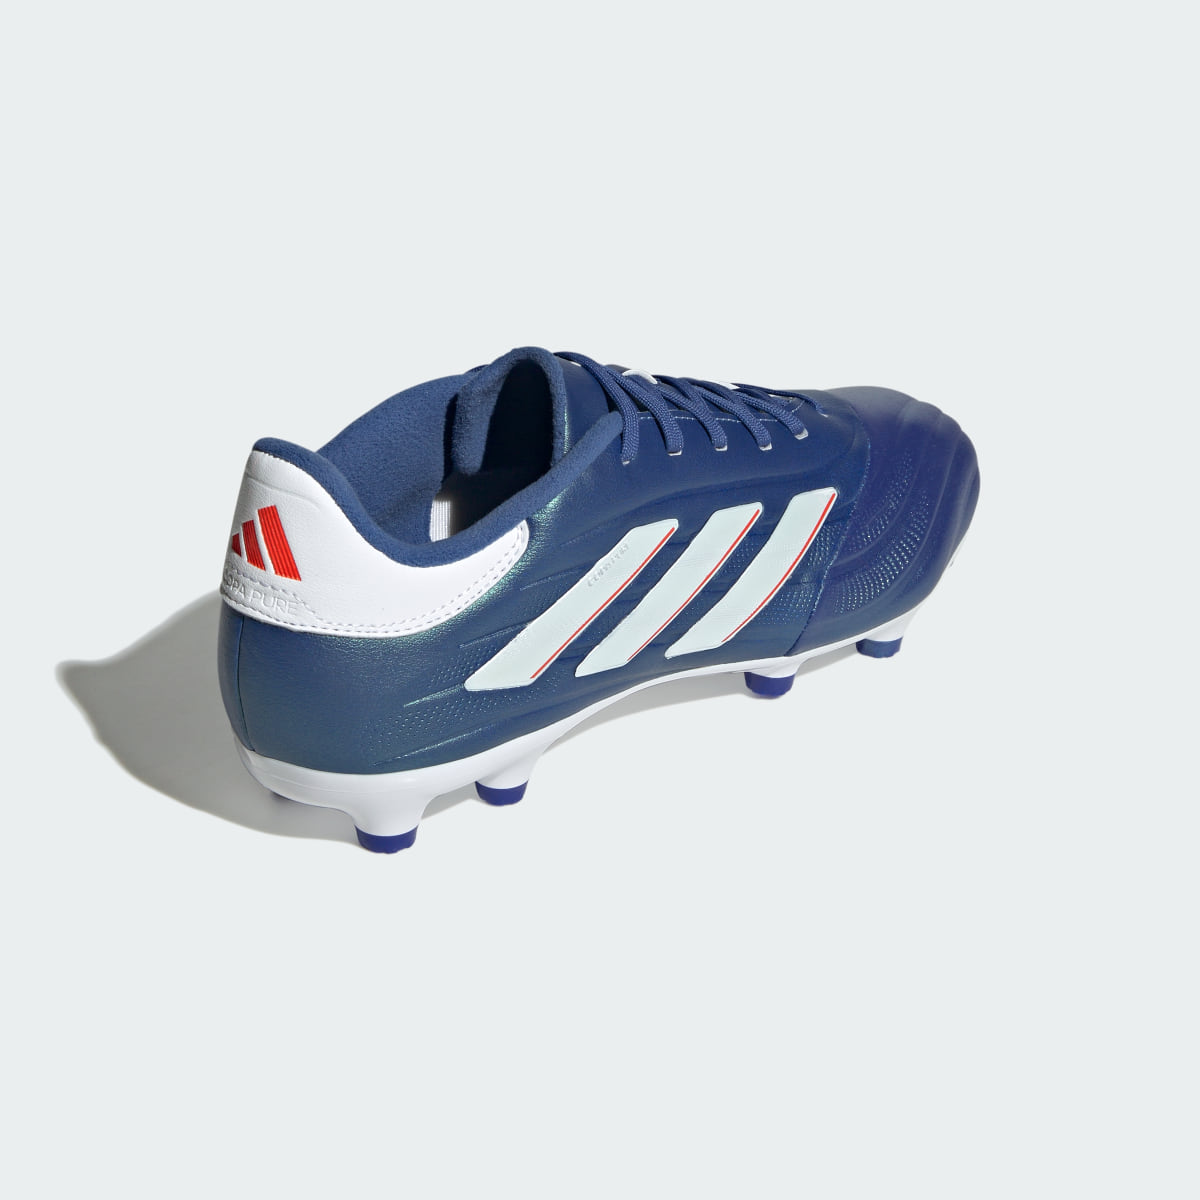 Adidas Copa Pure II.3 Firm Ground Boots. 6